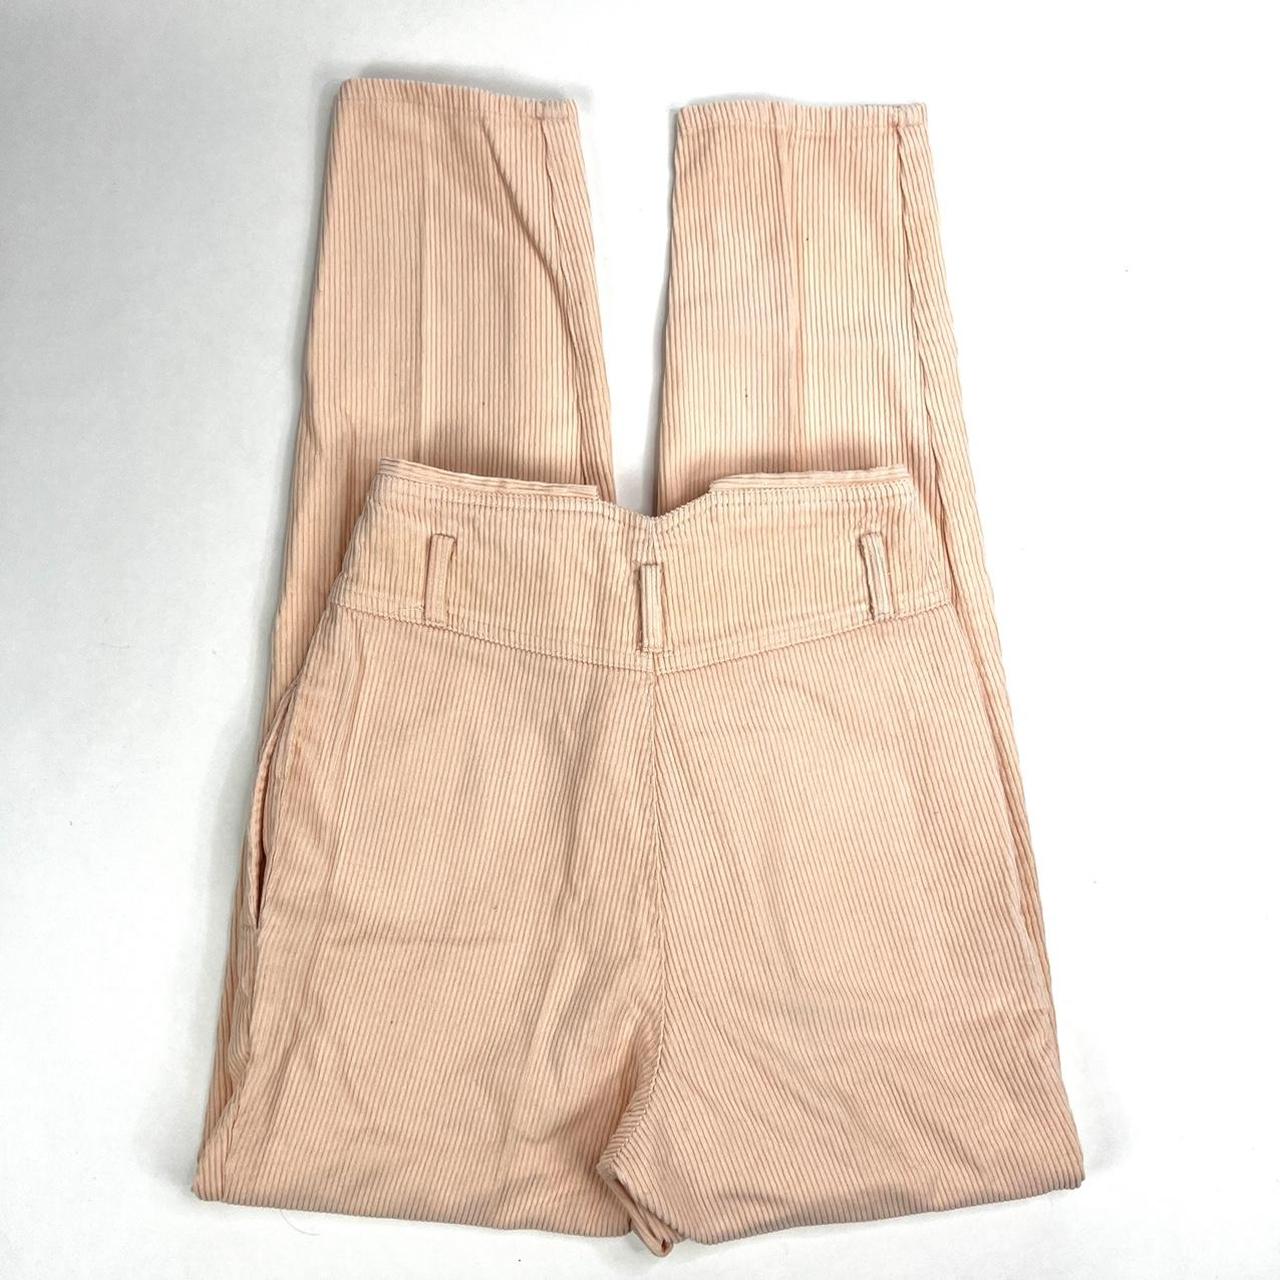 Product Image 3 - 80s/90s Vintage High Waisted Cords,